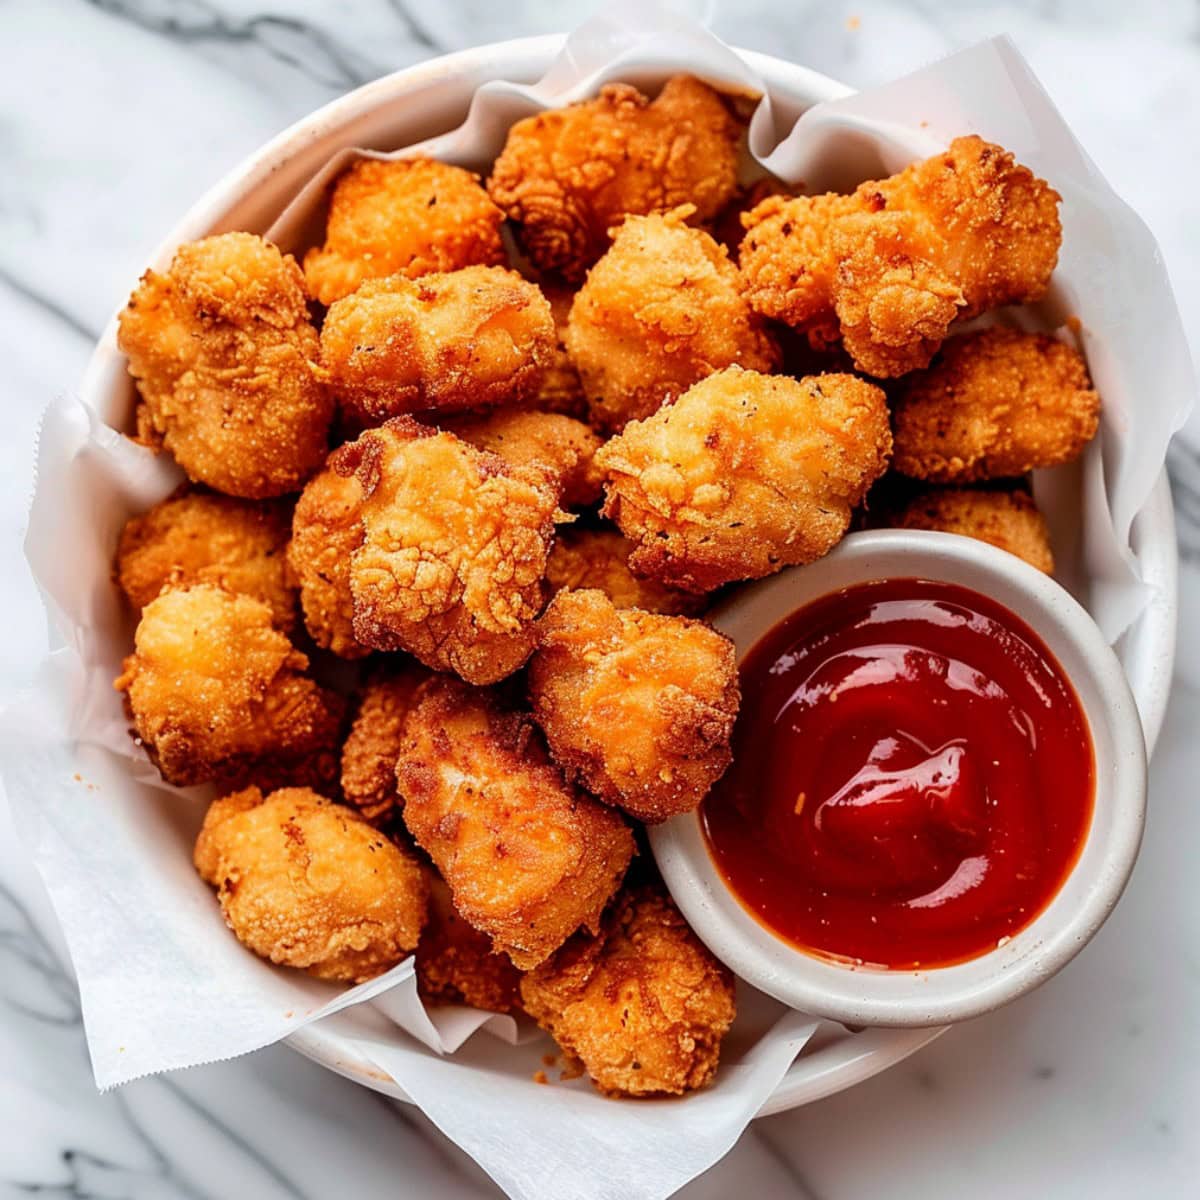 Crispy and delicious popcorn chicken, perfect for snacking